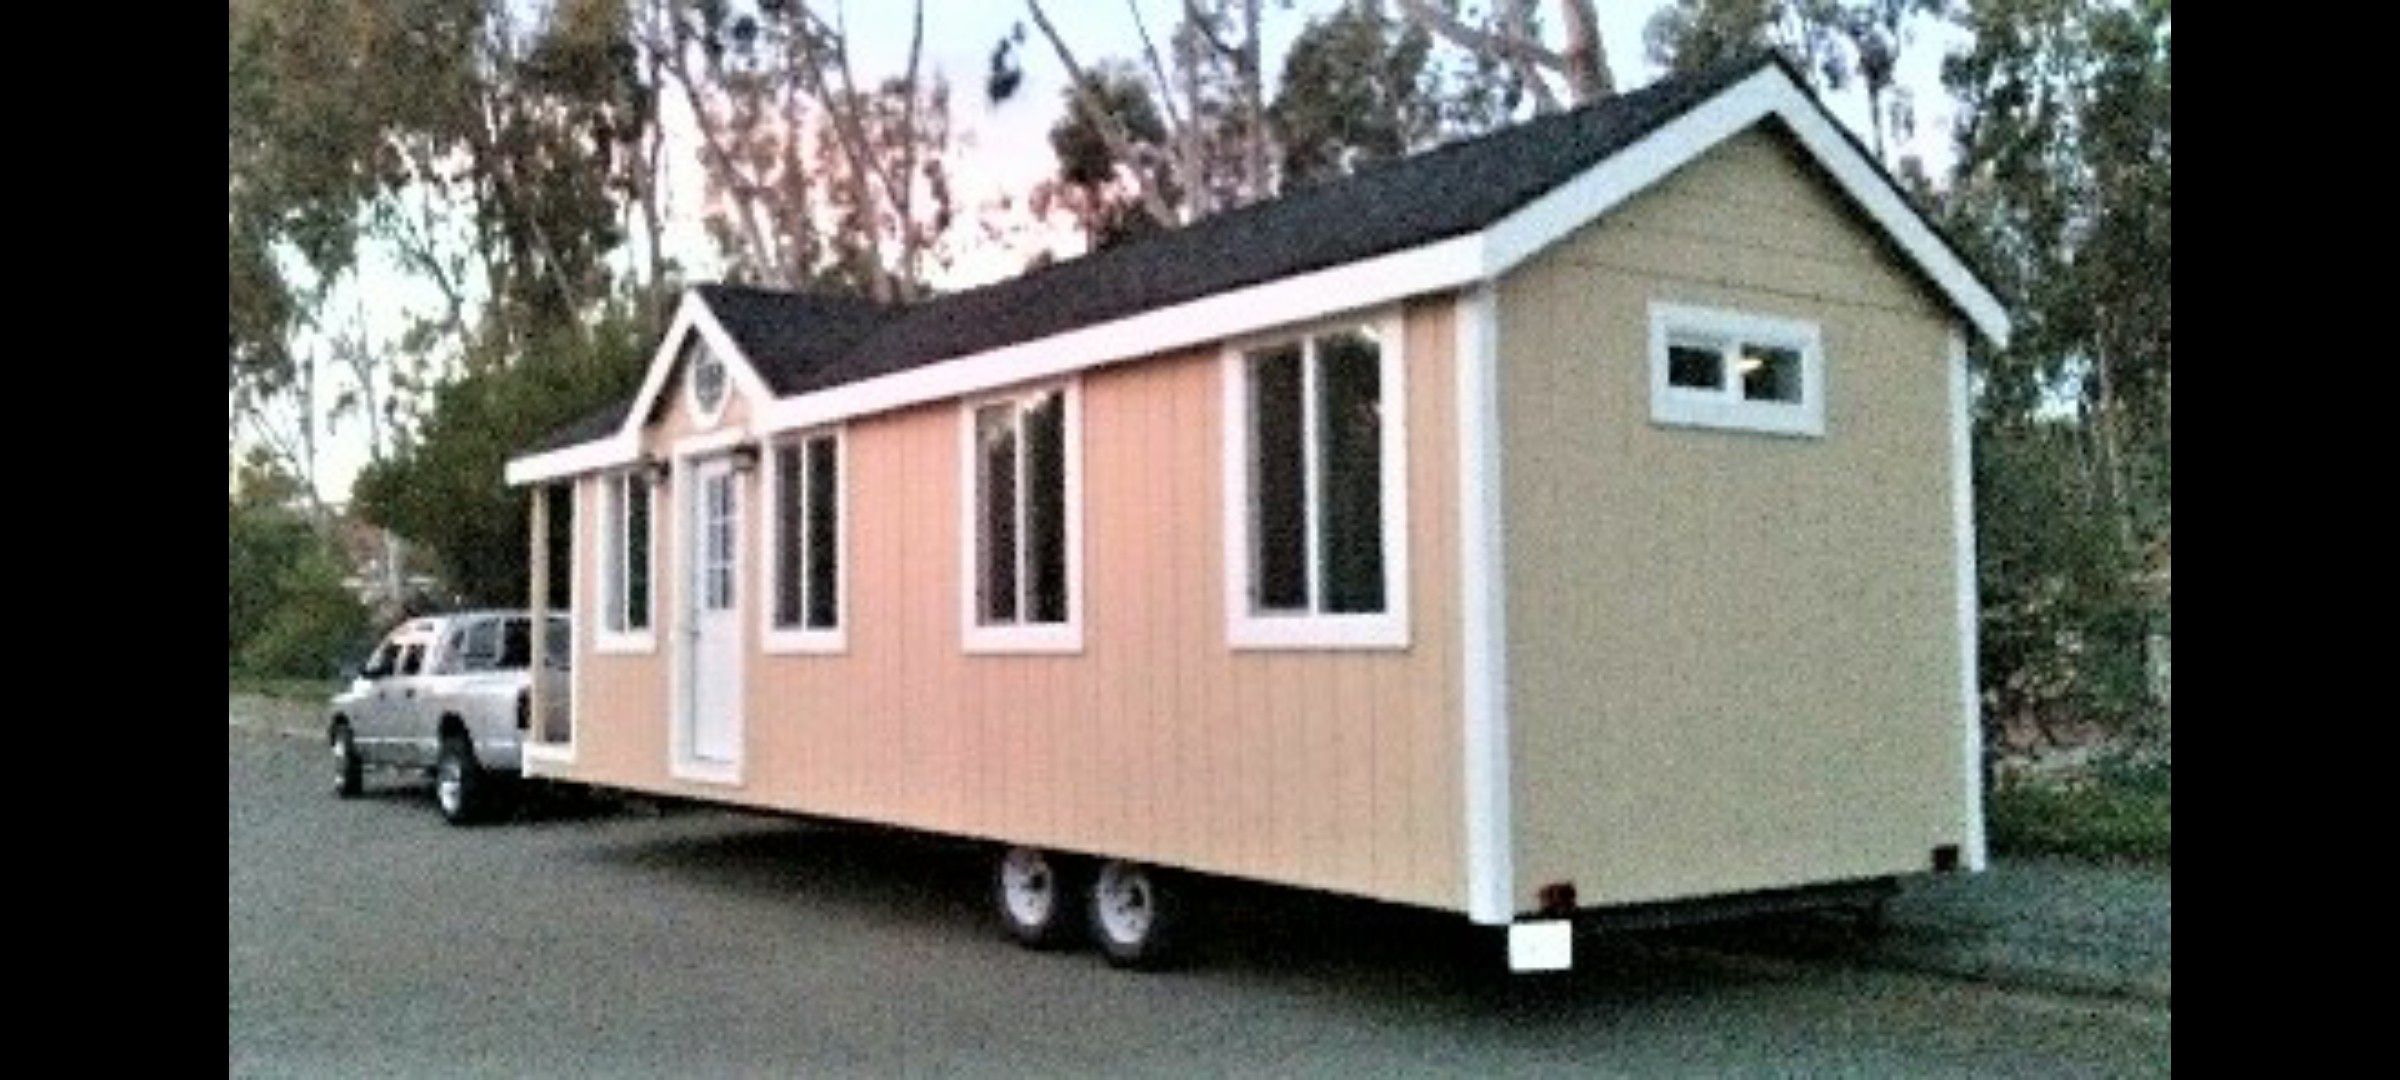 Photo 8.5 x 30 TINY HOUAE TRAILER FULL KITCHEN LAUNDRY AND BATHROOM READY TO LIVE IN